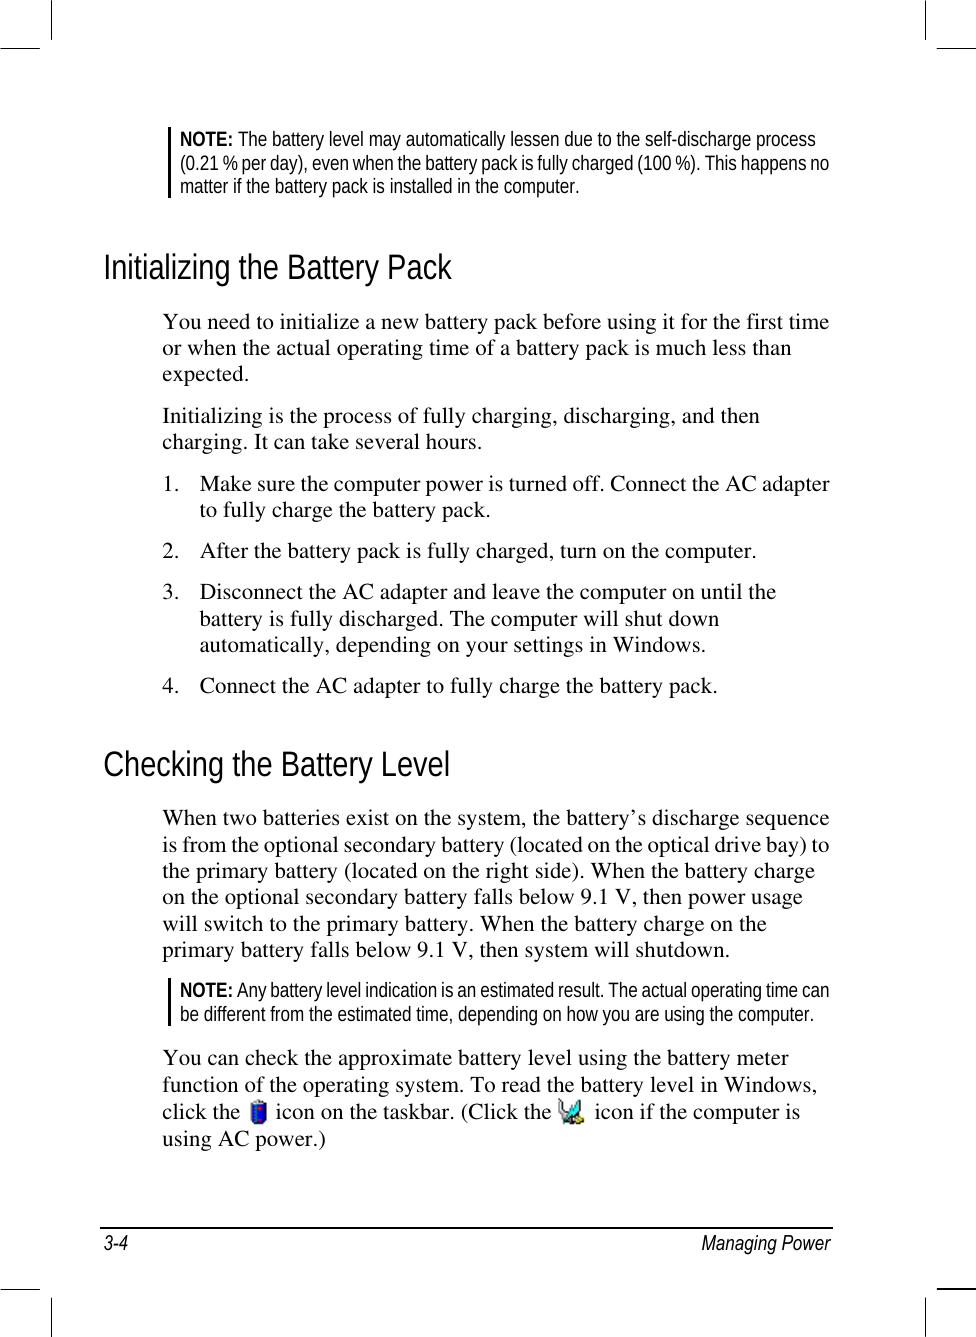  NOTE: The battery level may automatically lessen due to the self-discharge process (0.21 % per day), even when the battery pack is fully charged (100 %). This happens no matter if the battery pack is installed in the computer.  Initializing the Battery Pack You need to initialize a new battery pack before using it for the first time or when the actual operating time of a battery pack is much less than expected. Initializing is the process of fully charging, discharging, and then charging. It can take several hours. 1.  Make sure the computer power is turned off. Connect the AC adapter to fully charge the battery pack. 2.  After the battery pack is fully charged, turn on the computer. 3.  Disconnect the AC adapter and leave the computer on until the battery is fully discharged. The computer will shut down automatically, depending on your settings in Windows. 4.  Connect the AC adapter to fully charge the battery pack. Checking the Battery Level When two batteries exist on the system, the battery’s discharge sequence is from the optional secondary battery (located on the optical drive bay) to the primary battery (located on the right side). When the battery charge on the optional secondary battery falls below 9.1 V, then power usage will switch to the primary battery. When the battery charge on the primary battery falls below 9.1 V, then system will shutdown. NOTE: Any battery level indication is an estimated result. The actual operating time can be different from the estimated time, depending on how you are using the computer.  You can check the approximate battery level using the battery meter function of the operating system. To read the battery level in Windows, click the   icon on the taskbar. (Click the   icon if the computer is using AC power.)  3-4 Managing Power 